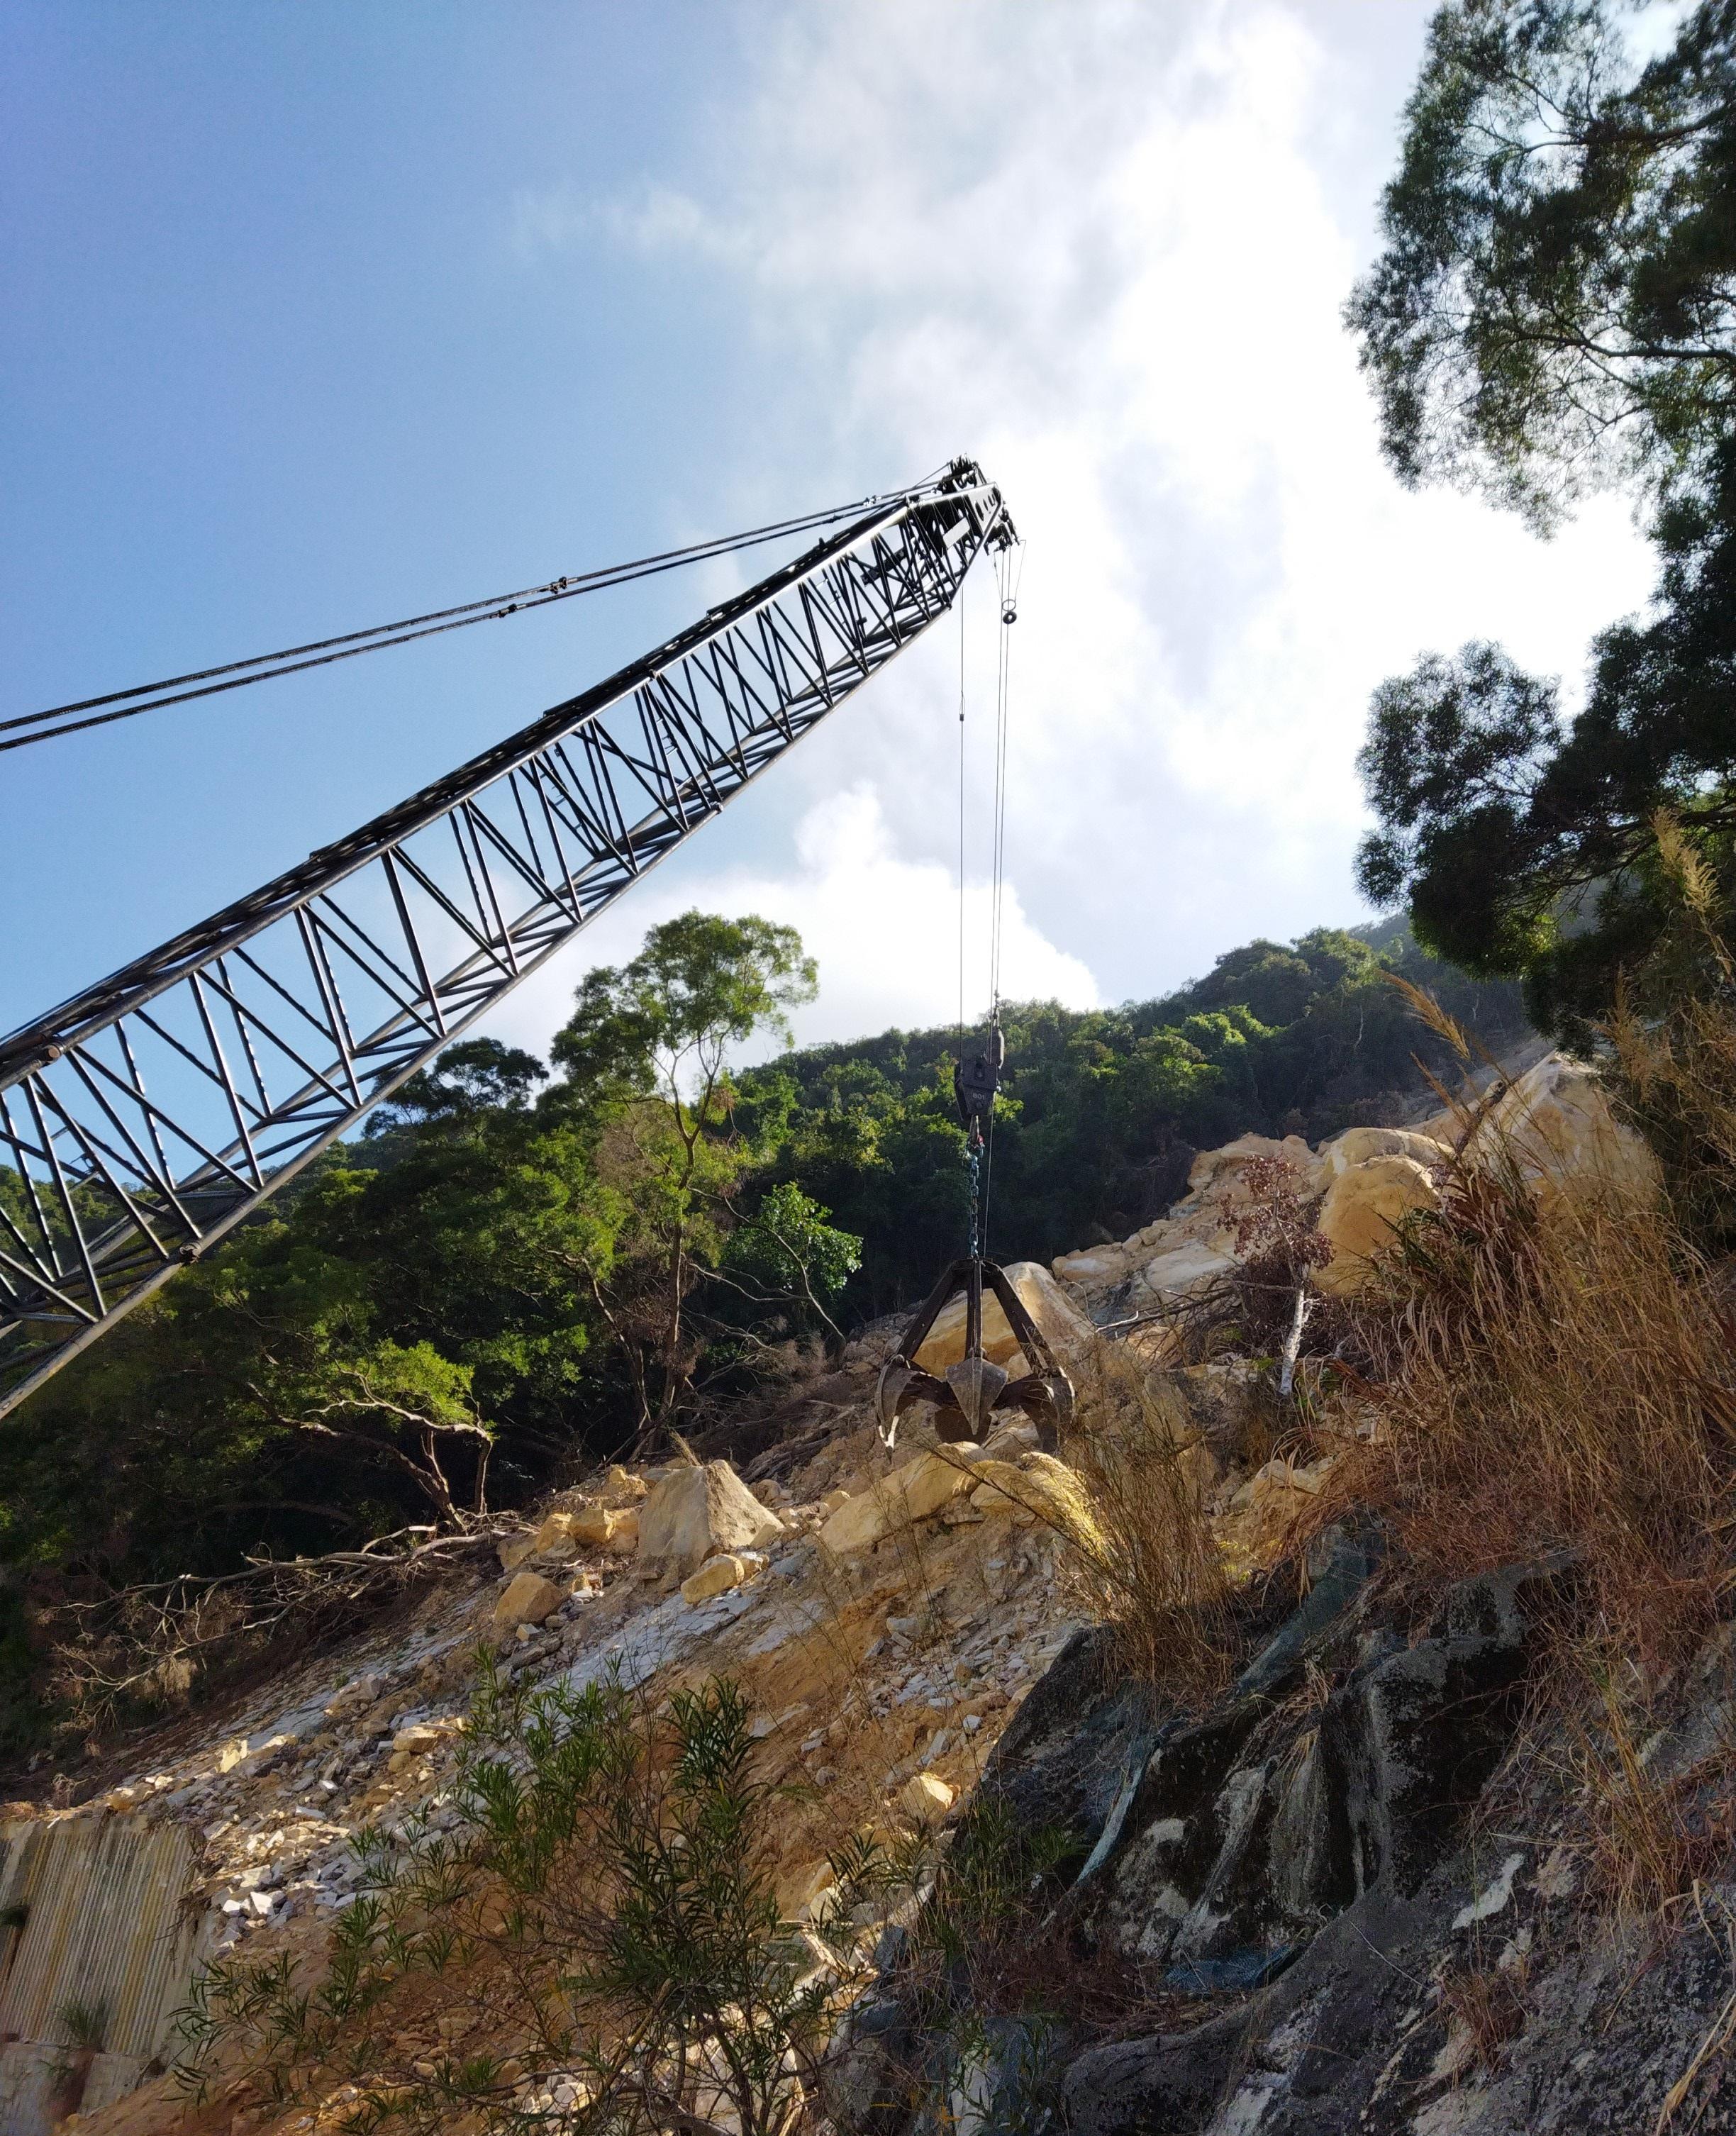 The Highways Department today (March 21) said that a section of the westbound traffic lane at Yiu Hing Road will be reopened on March 23. Photo shows the removal of boulders on the slope by a large crane earlier at the scene, which formed part of the repair works for the natural slope above Yiu Hing Road.